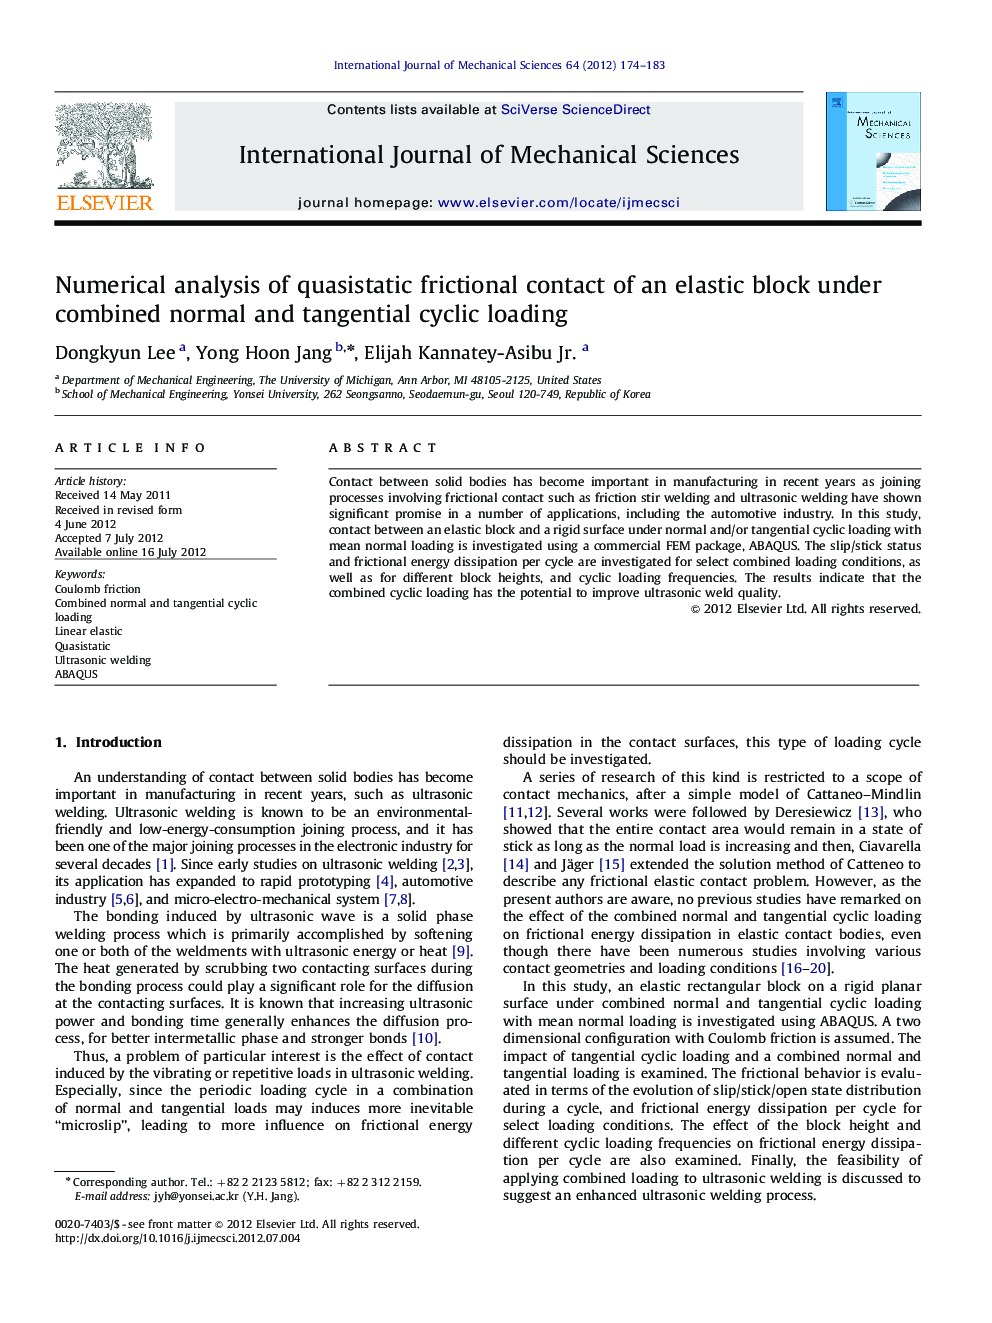 Numerical analysis of quasistatic frictional contact of an elastic block under combined normal and tangential cyclic loading